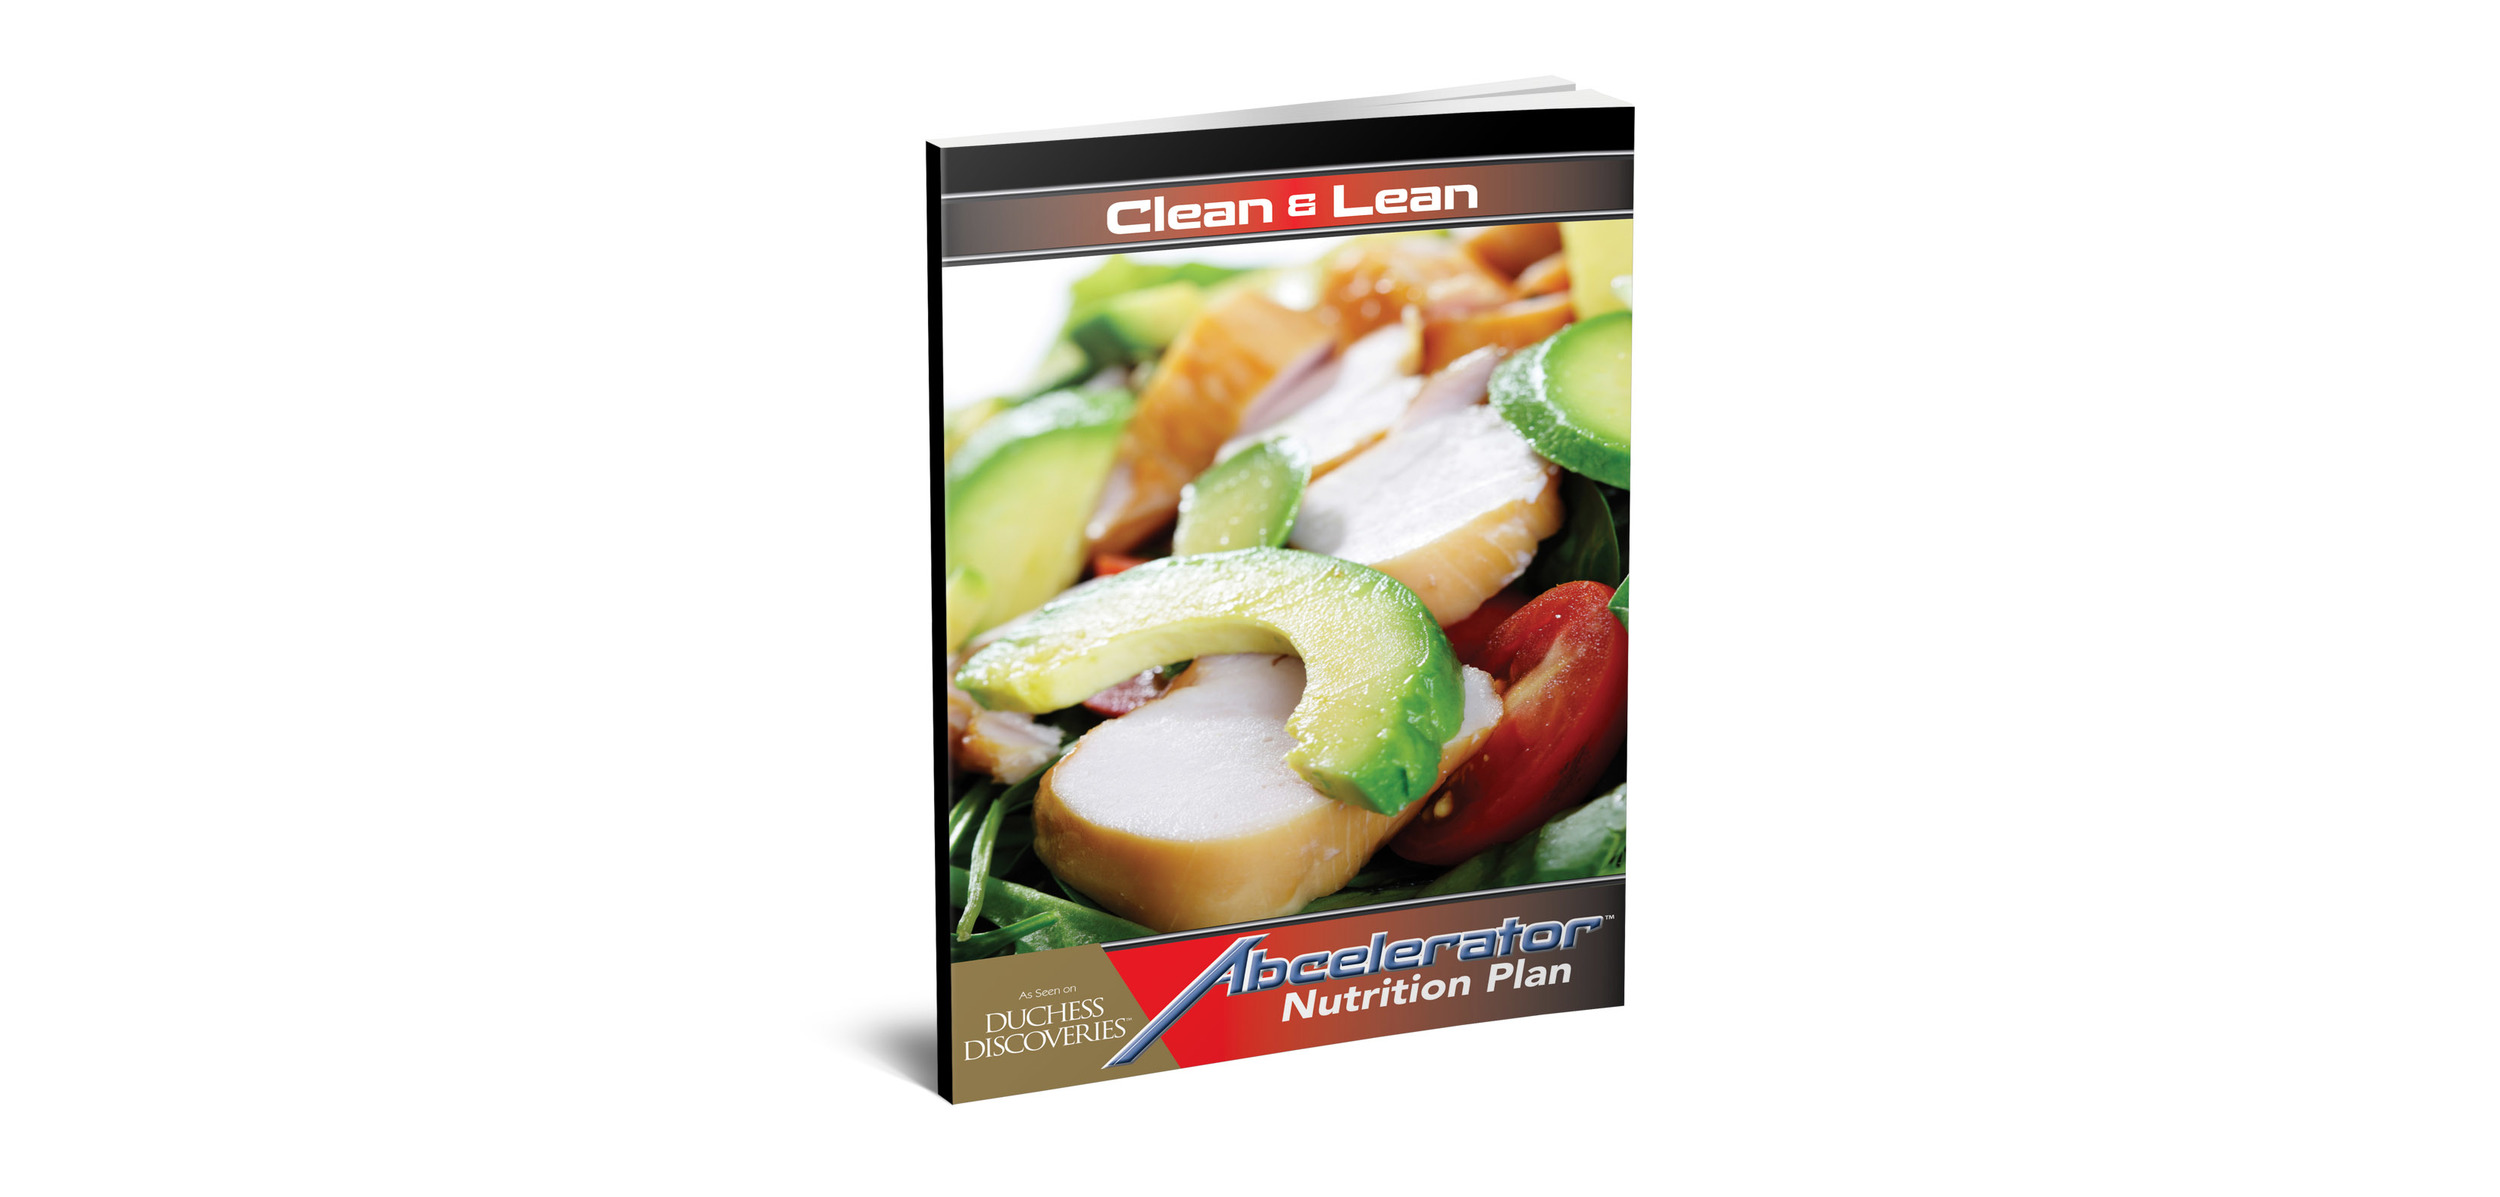 Tistar_Abeclerator_Nutrition Plan Book Cover_Mock Up.jpg